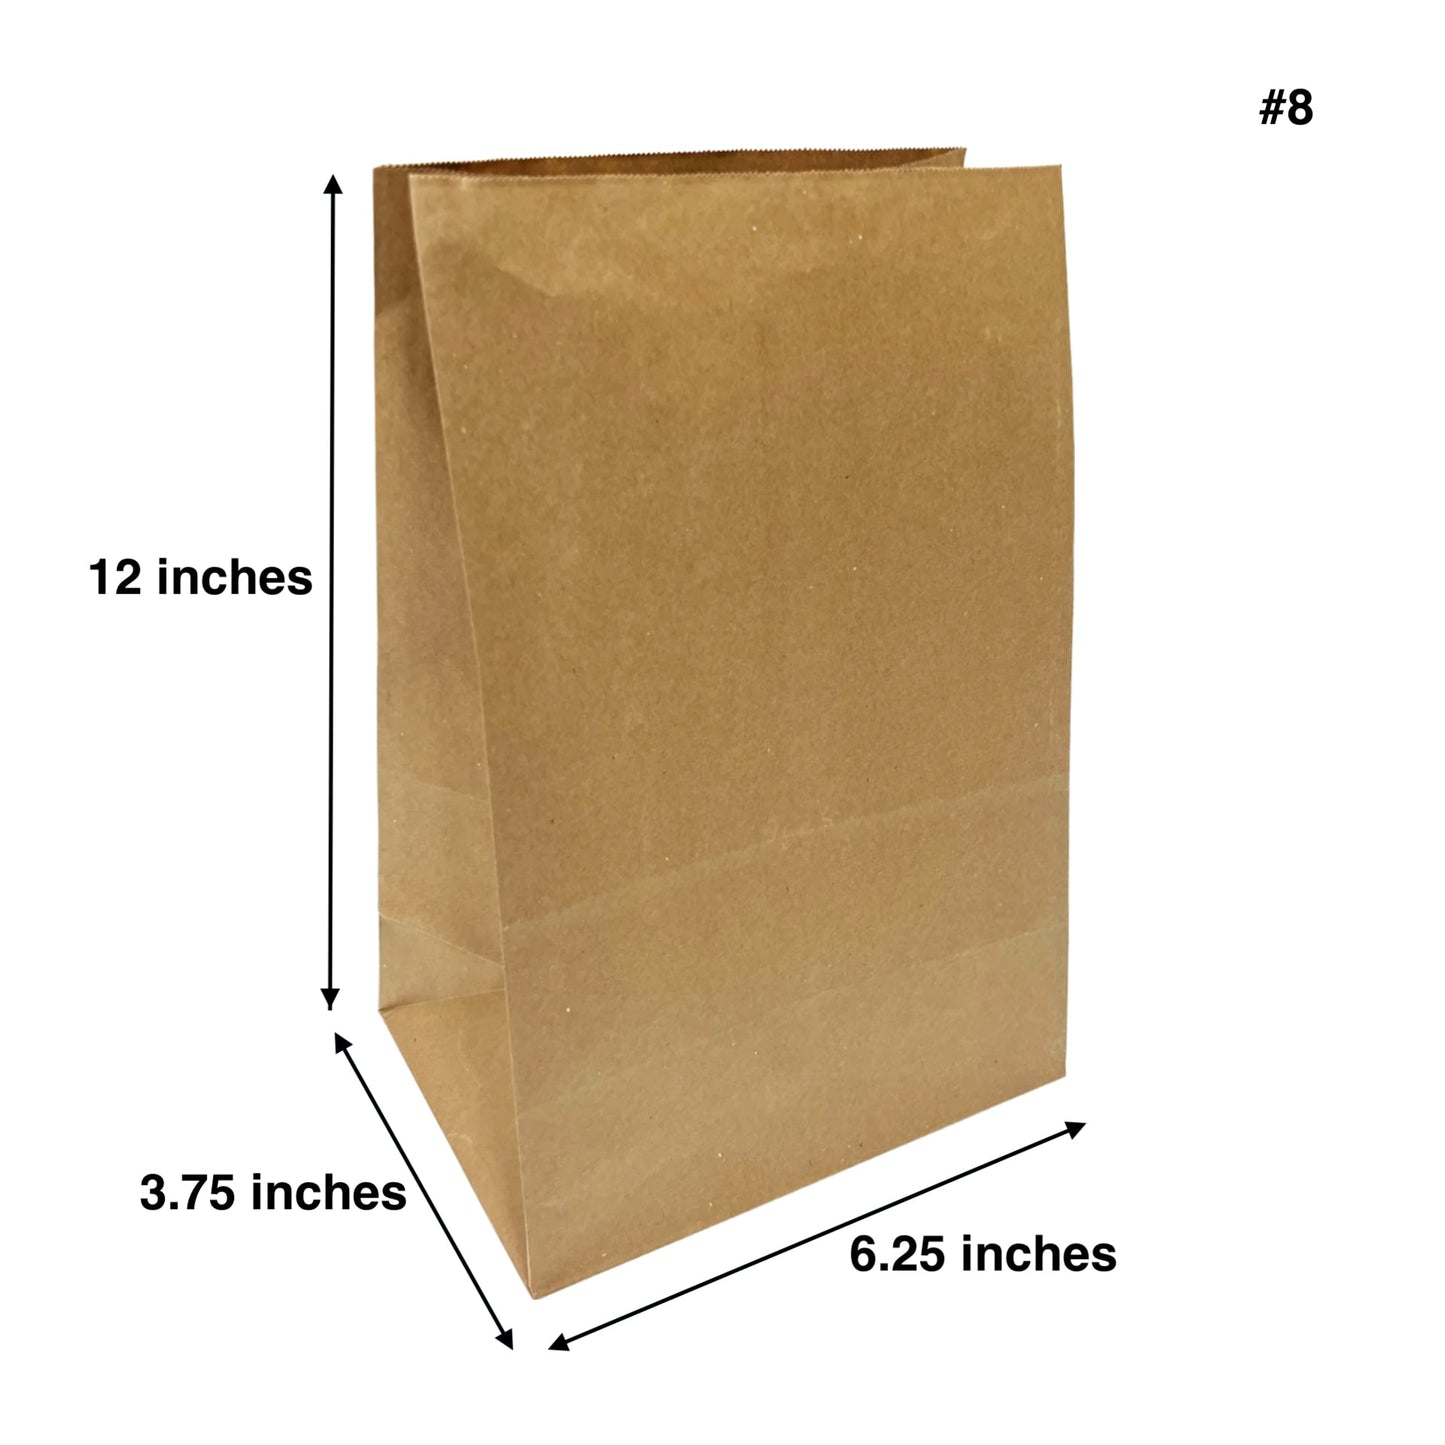 500pcs #8 Grocery Bags 6.25x3.75x12 inches; $0.06/pc